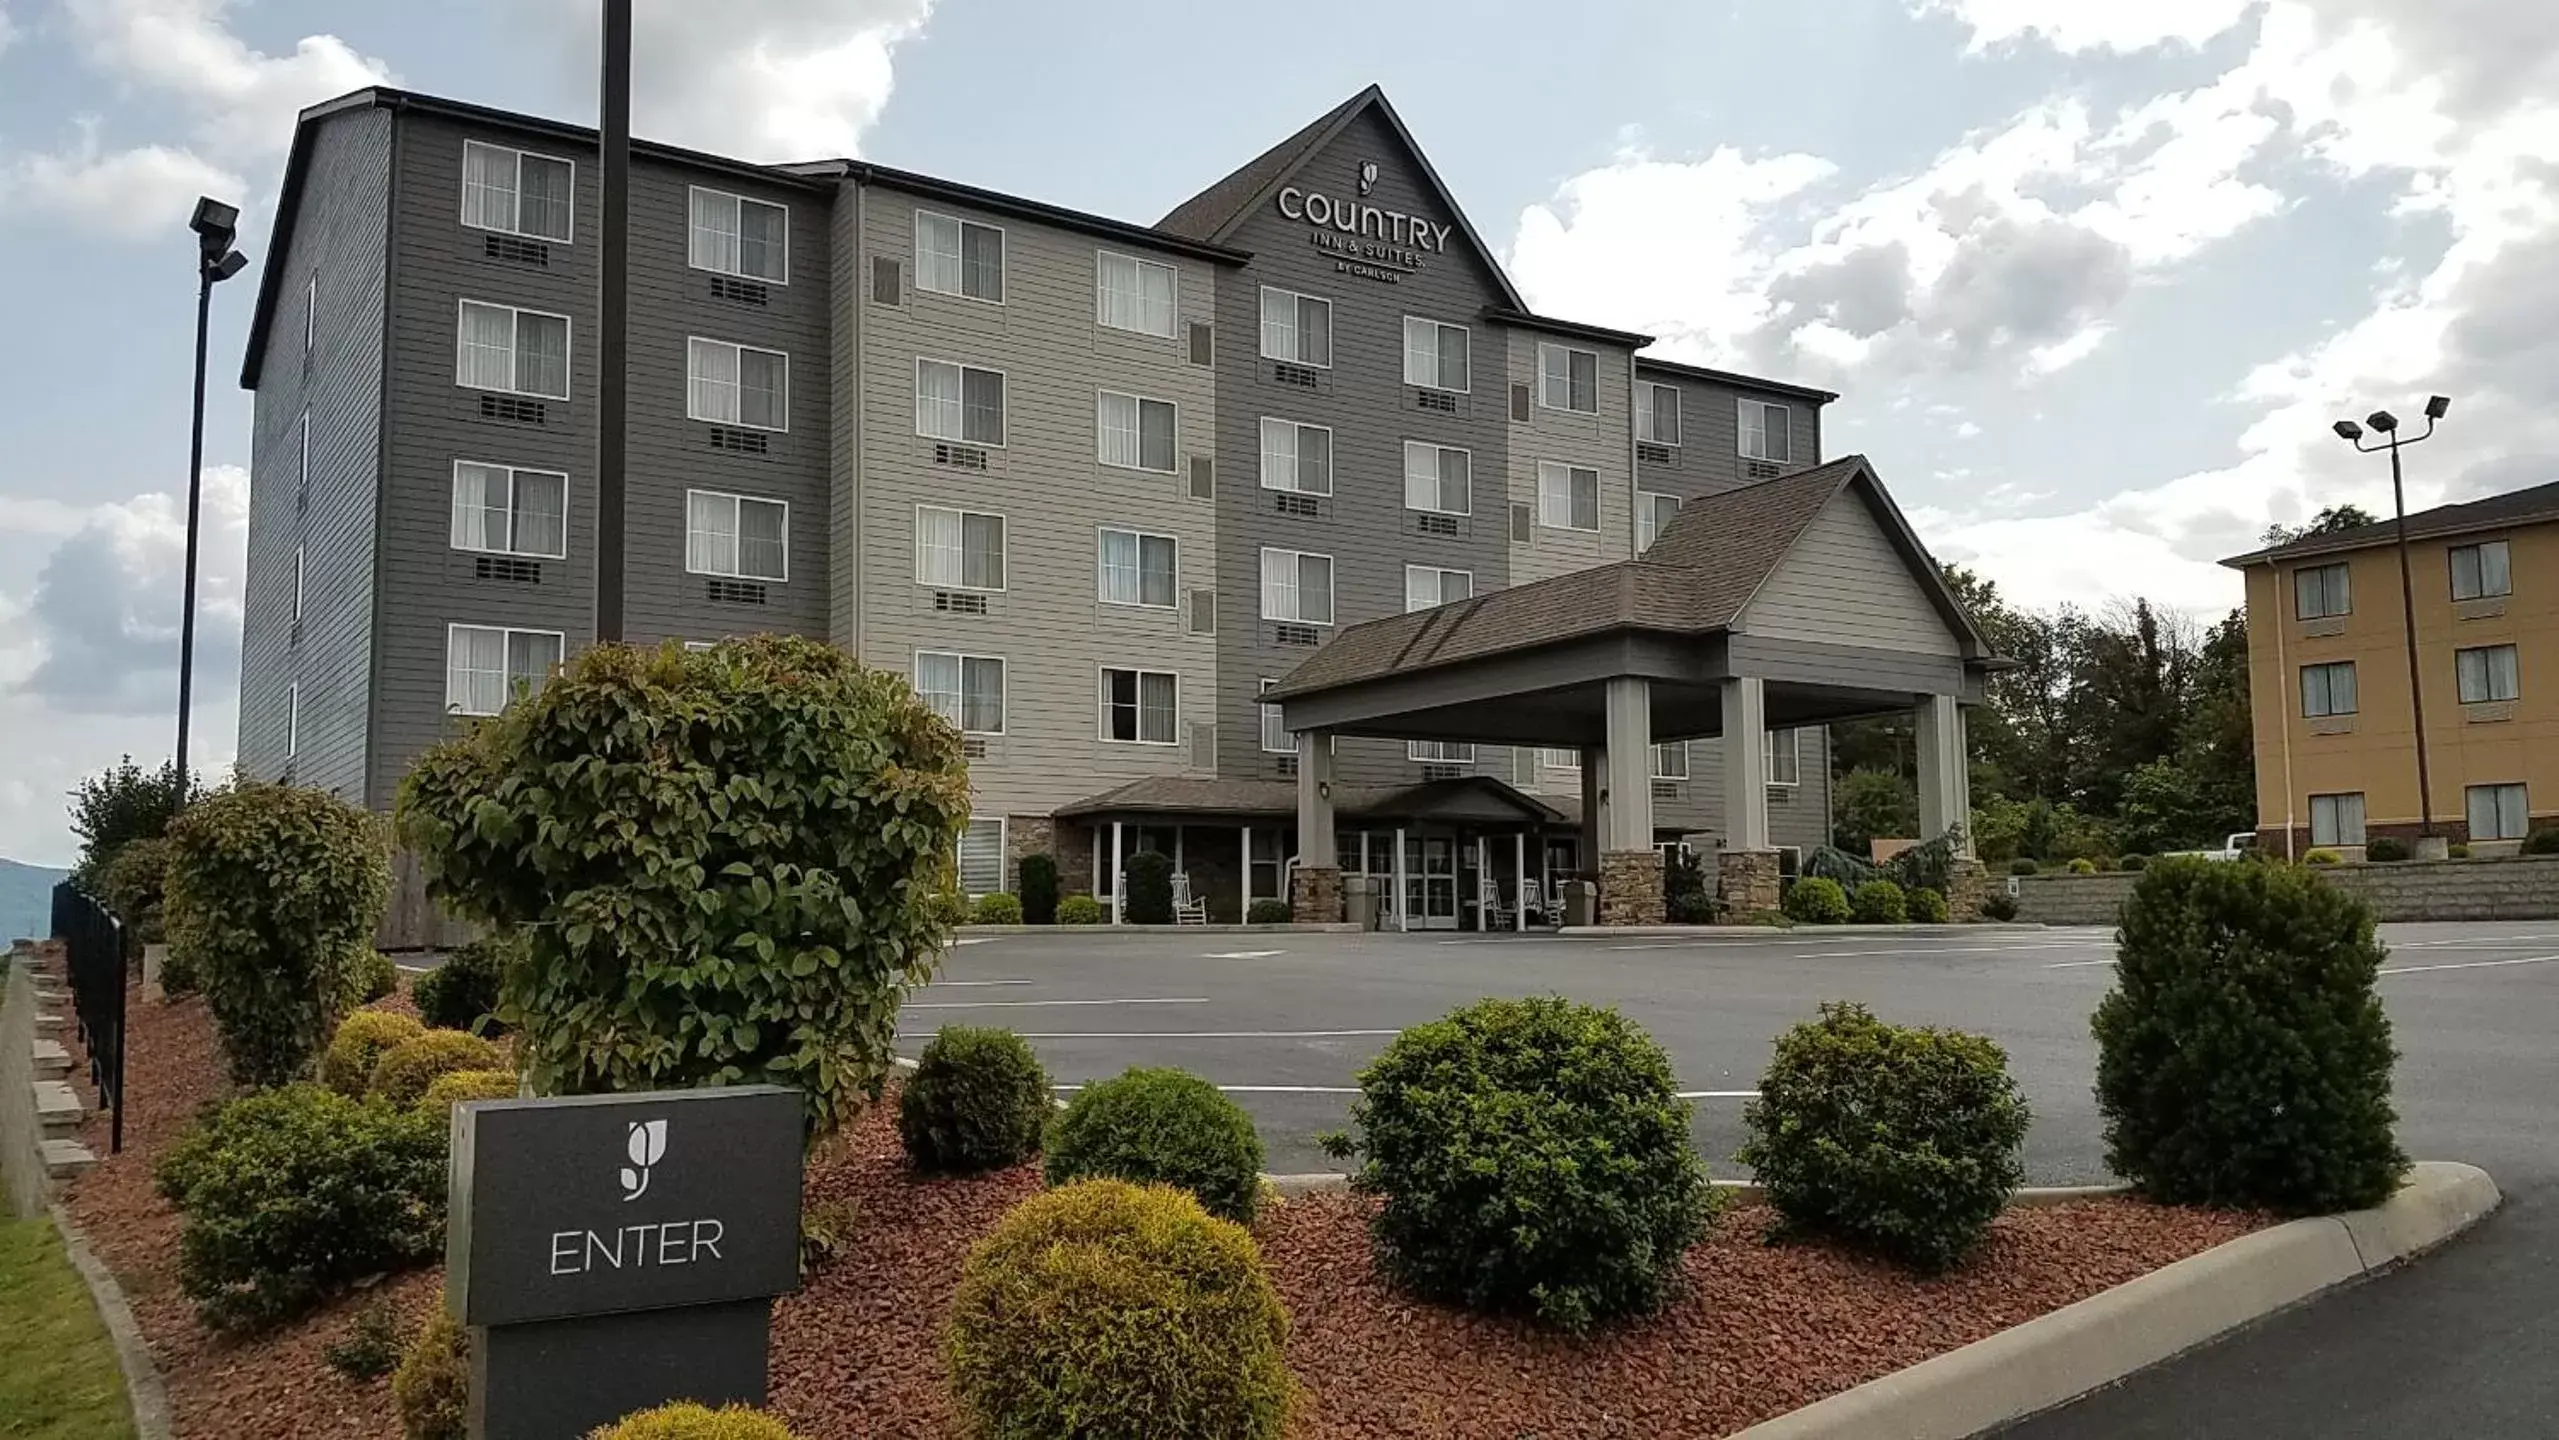 Facade/entrance, Property Building in Country Inn & Suites by Radisson, Wytheville, VA